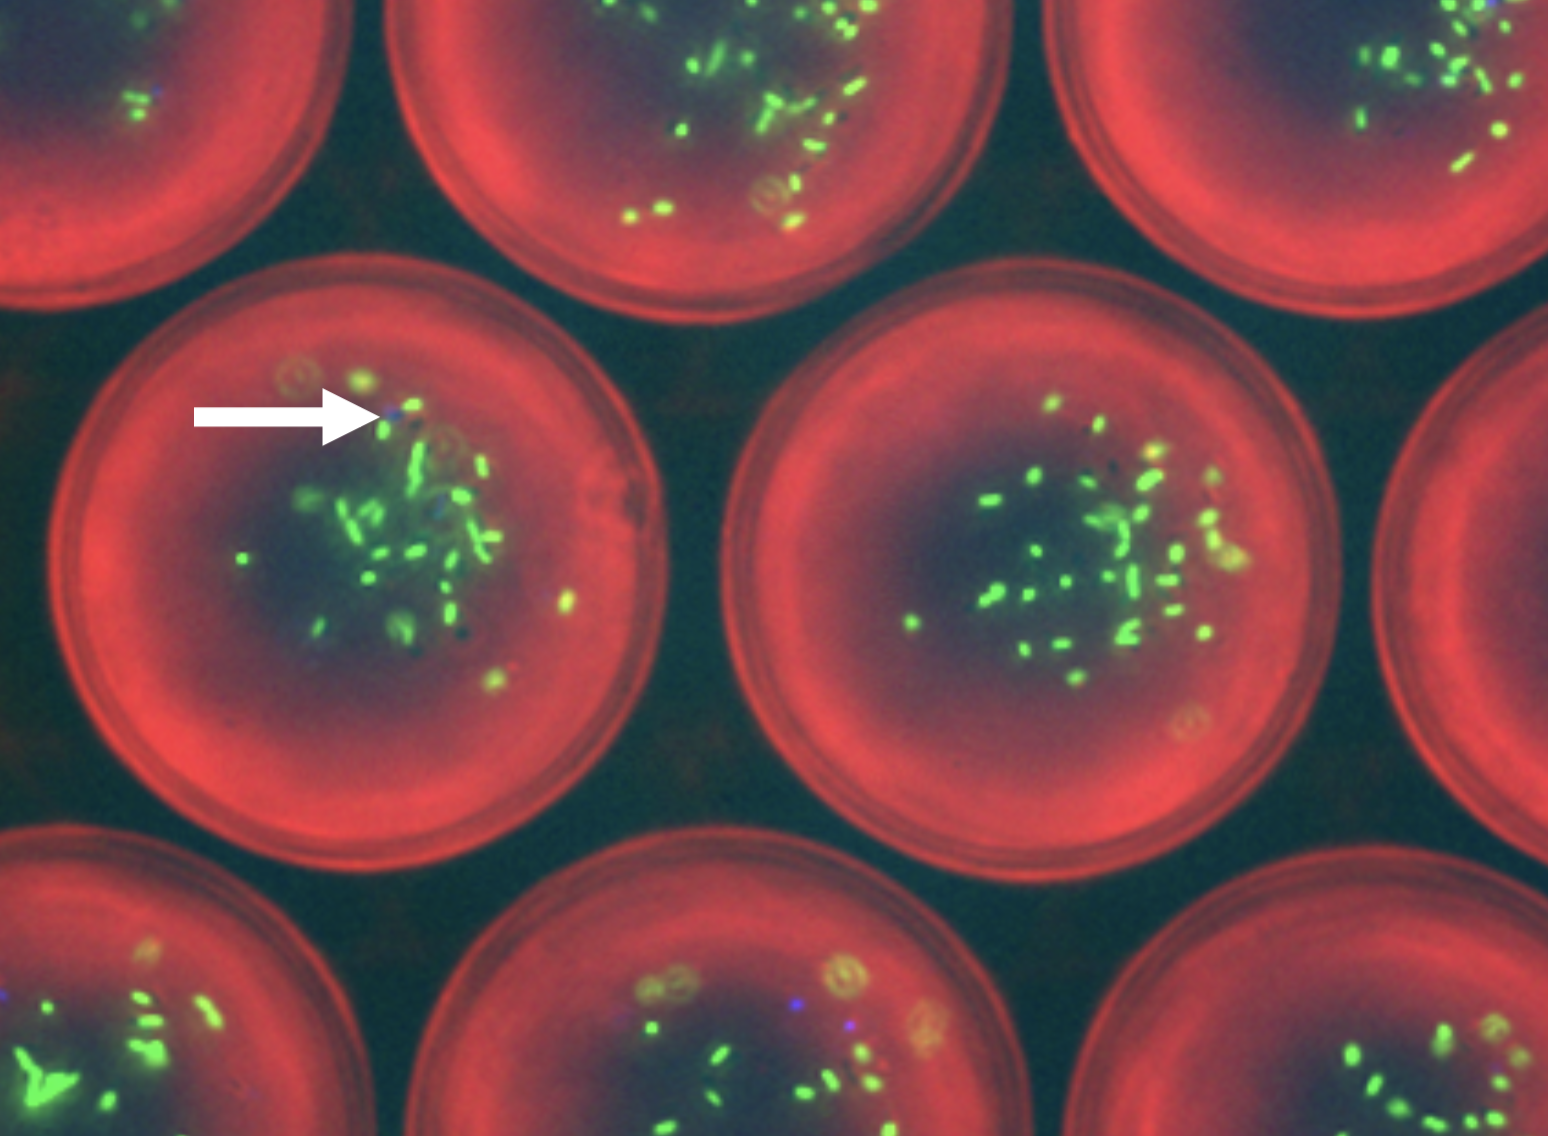 Bacteria encapsulated in droplets. (Source: inventor internal presentation)